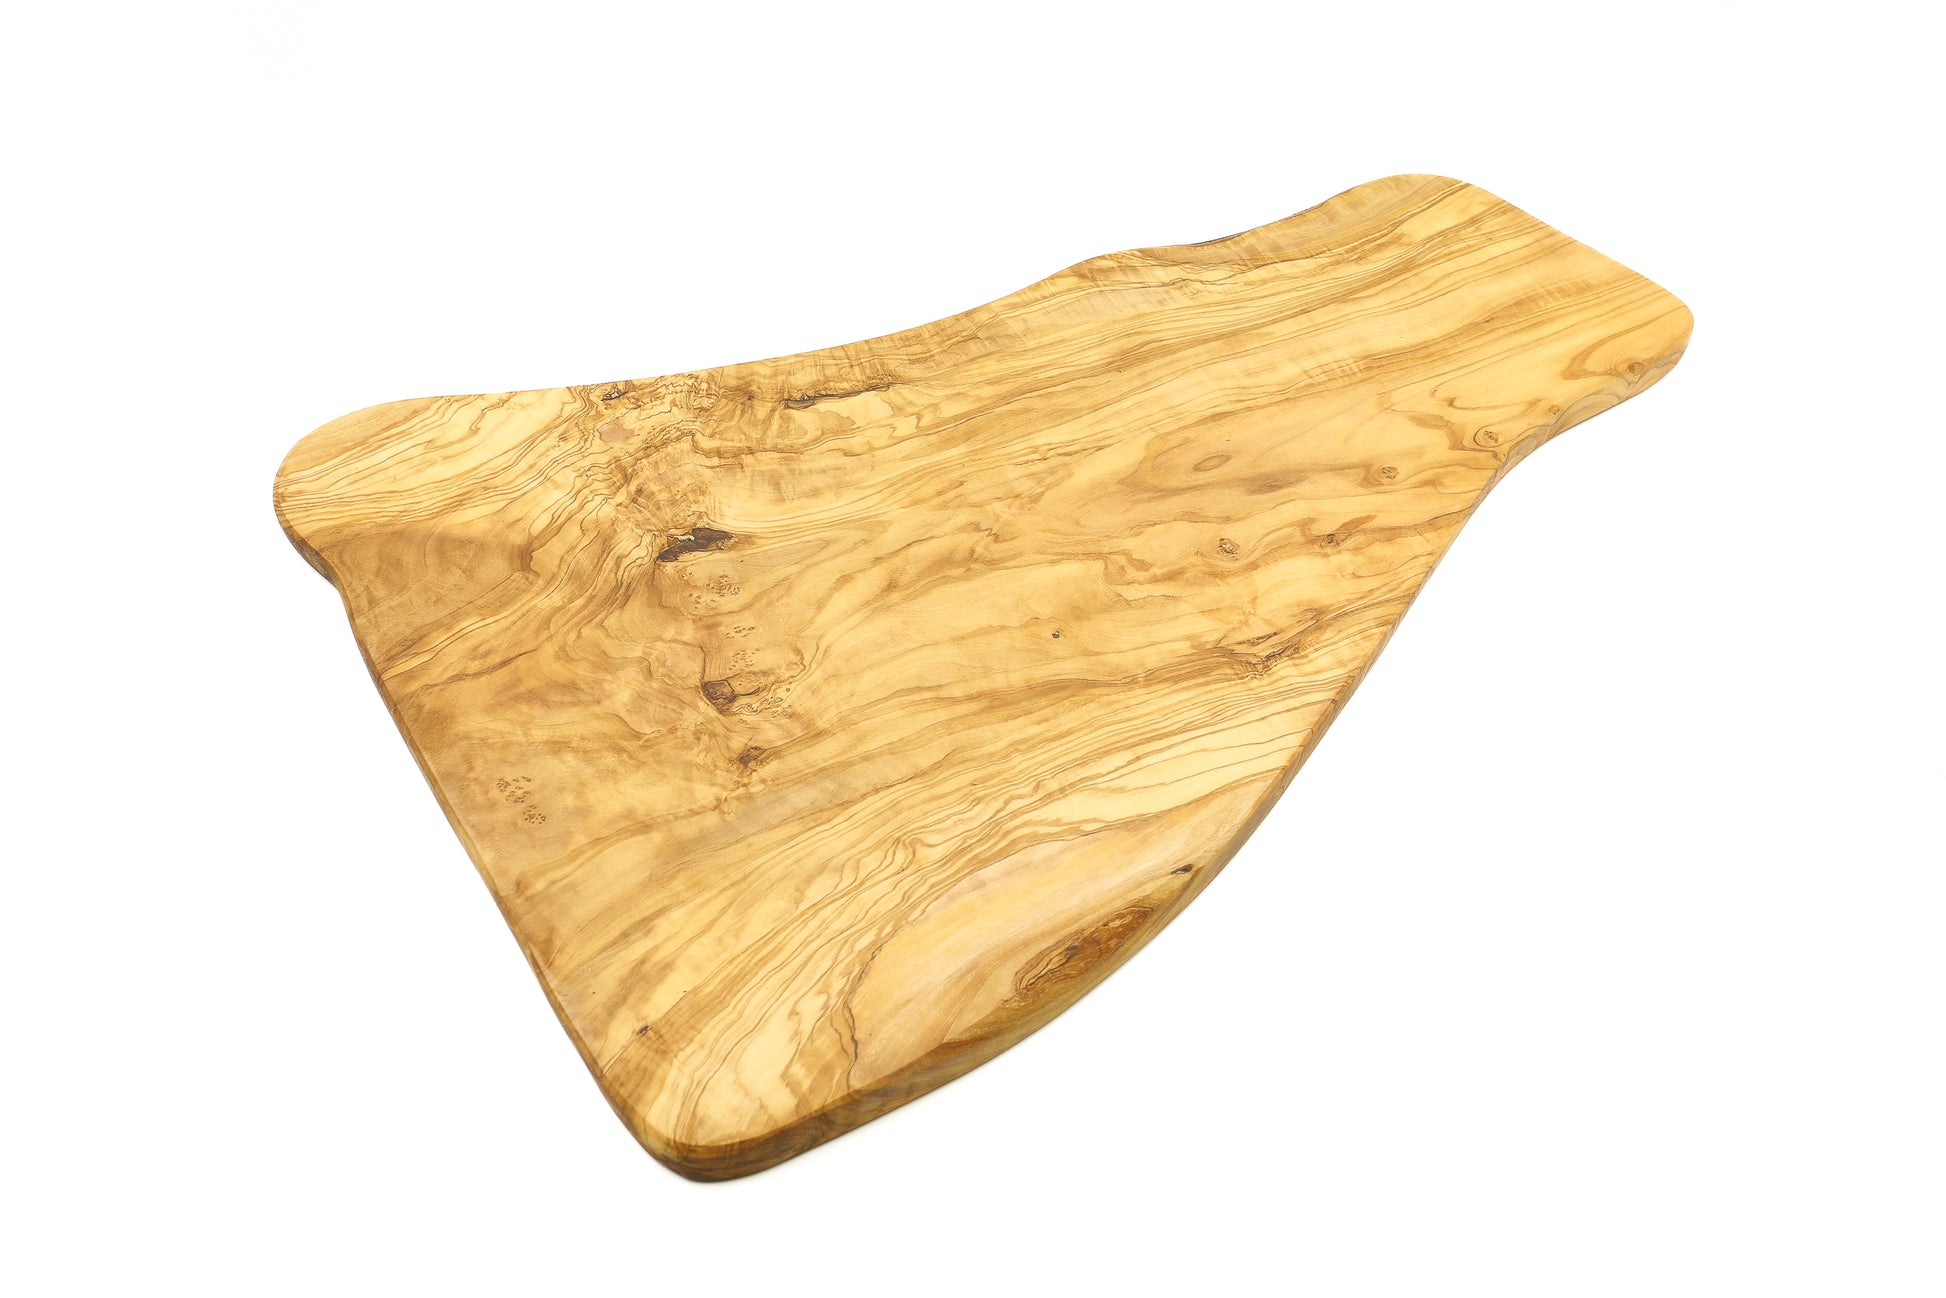 Xtra large olive wood kitchen board for versatile culinary use